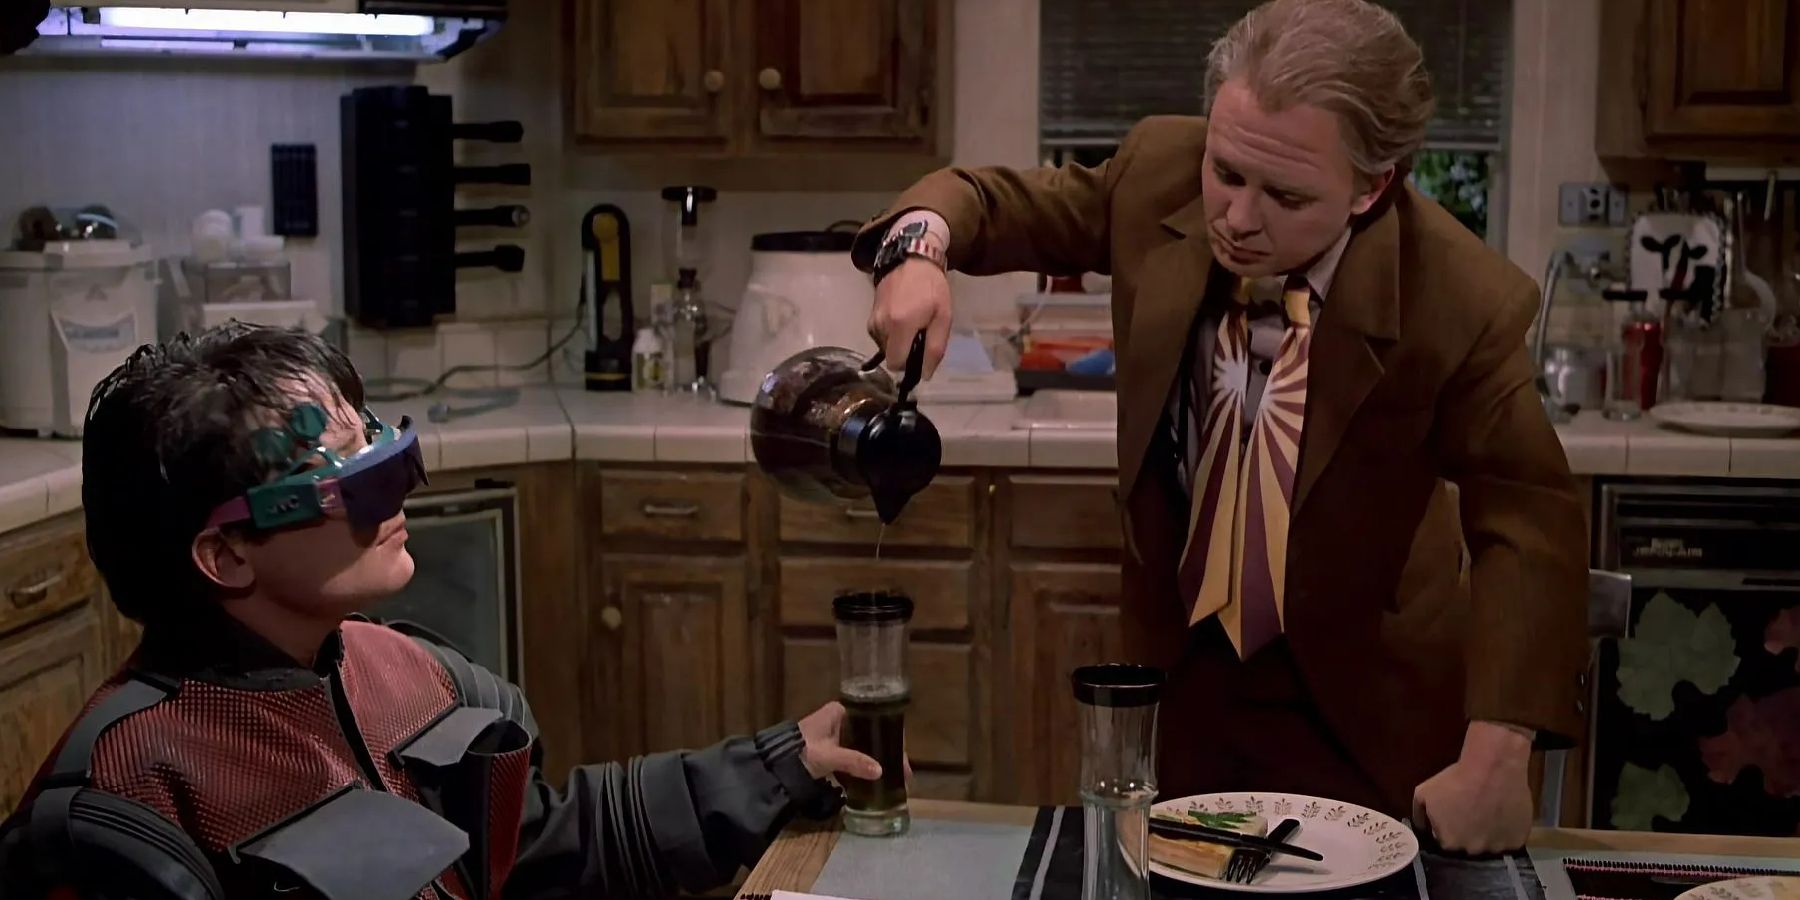 Marty McFly pours a drink for his son Marty McFly Jr. in Back to the Future 2.